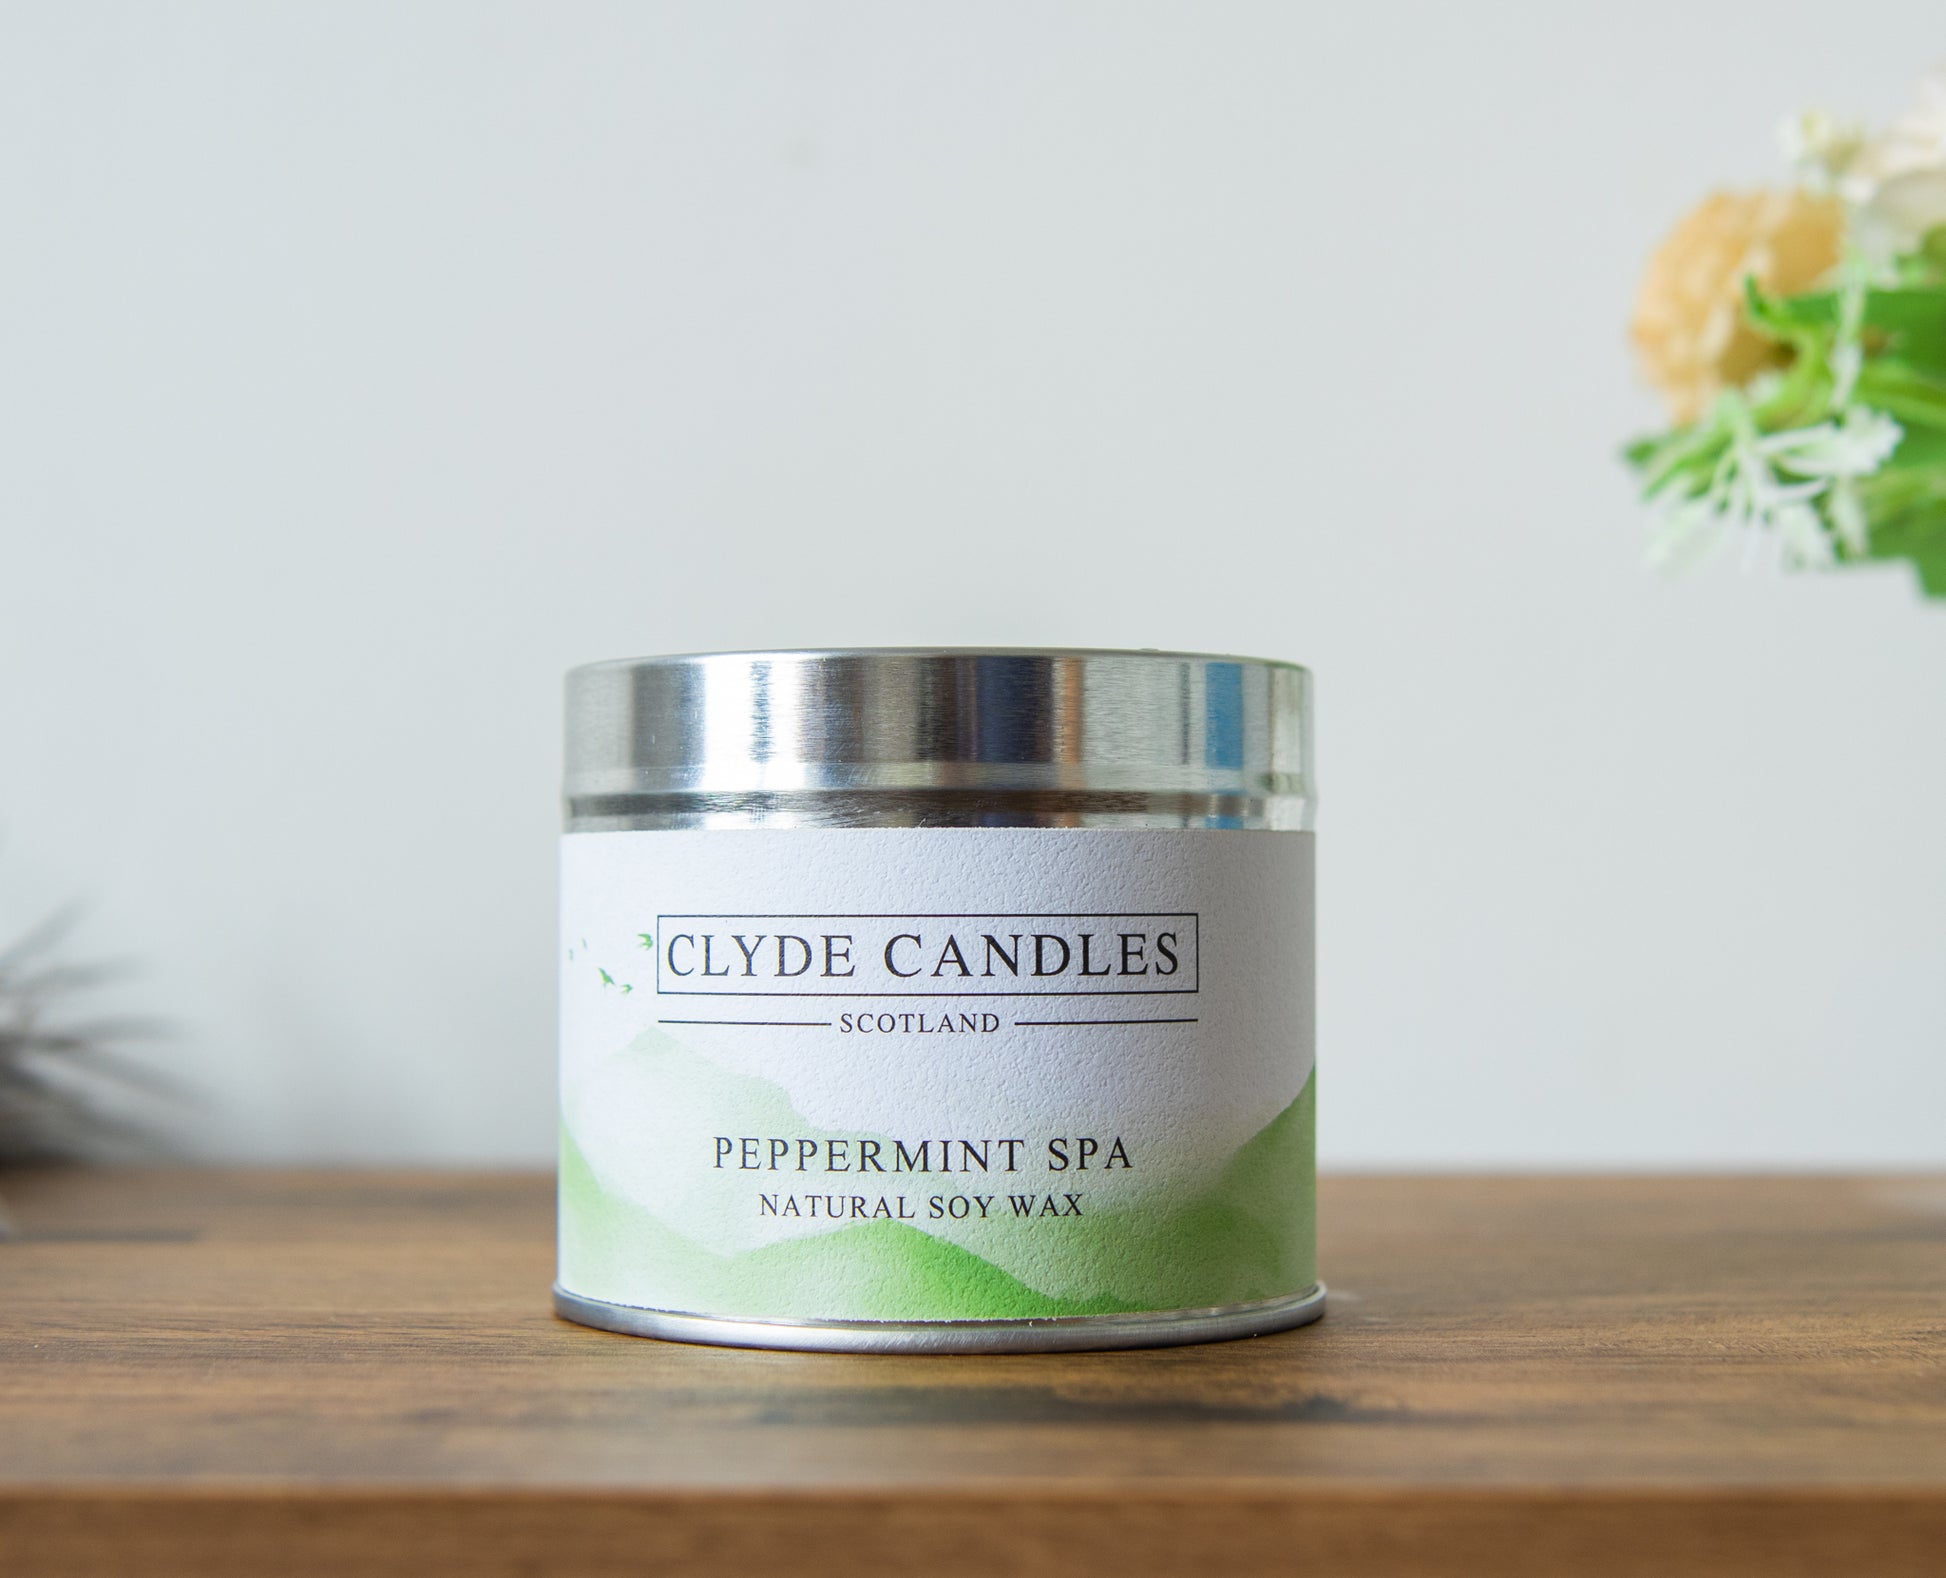 Peppermint Spa Scented Candle Tin Natural Soy wax, Scottish Candles, Clyde Candles